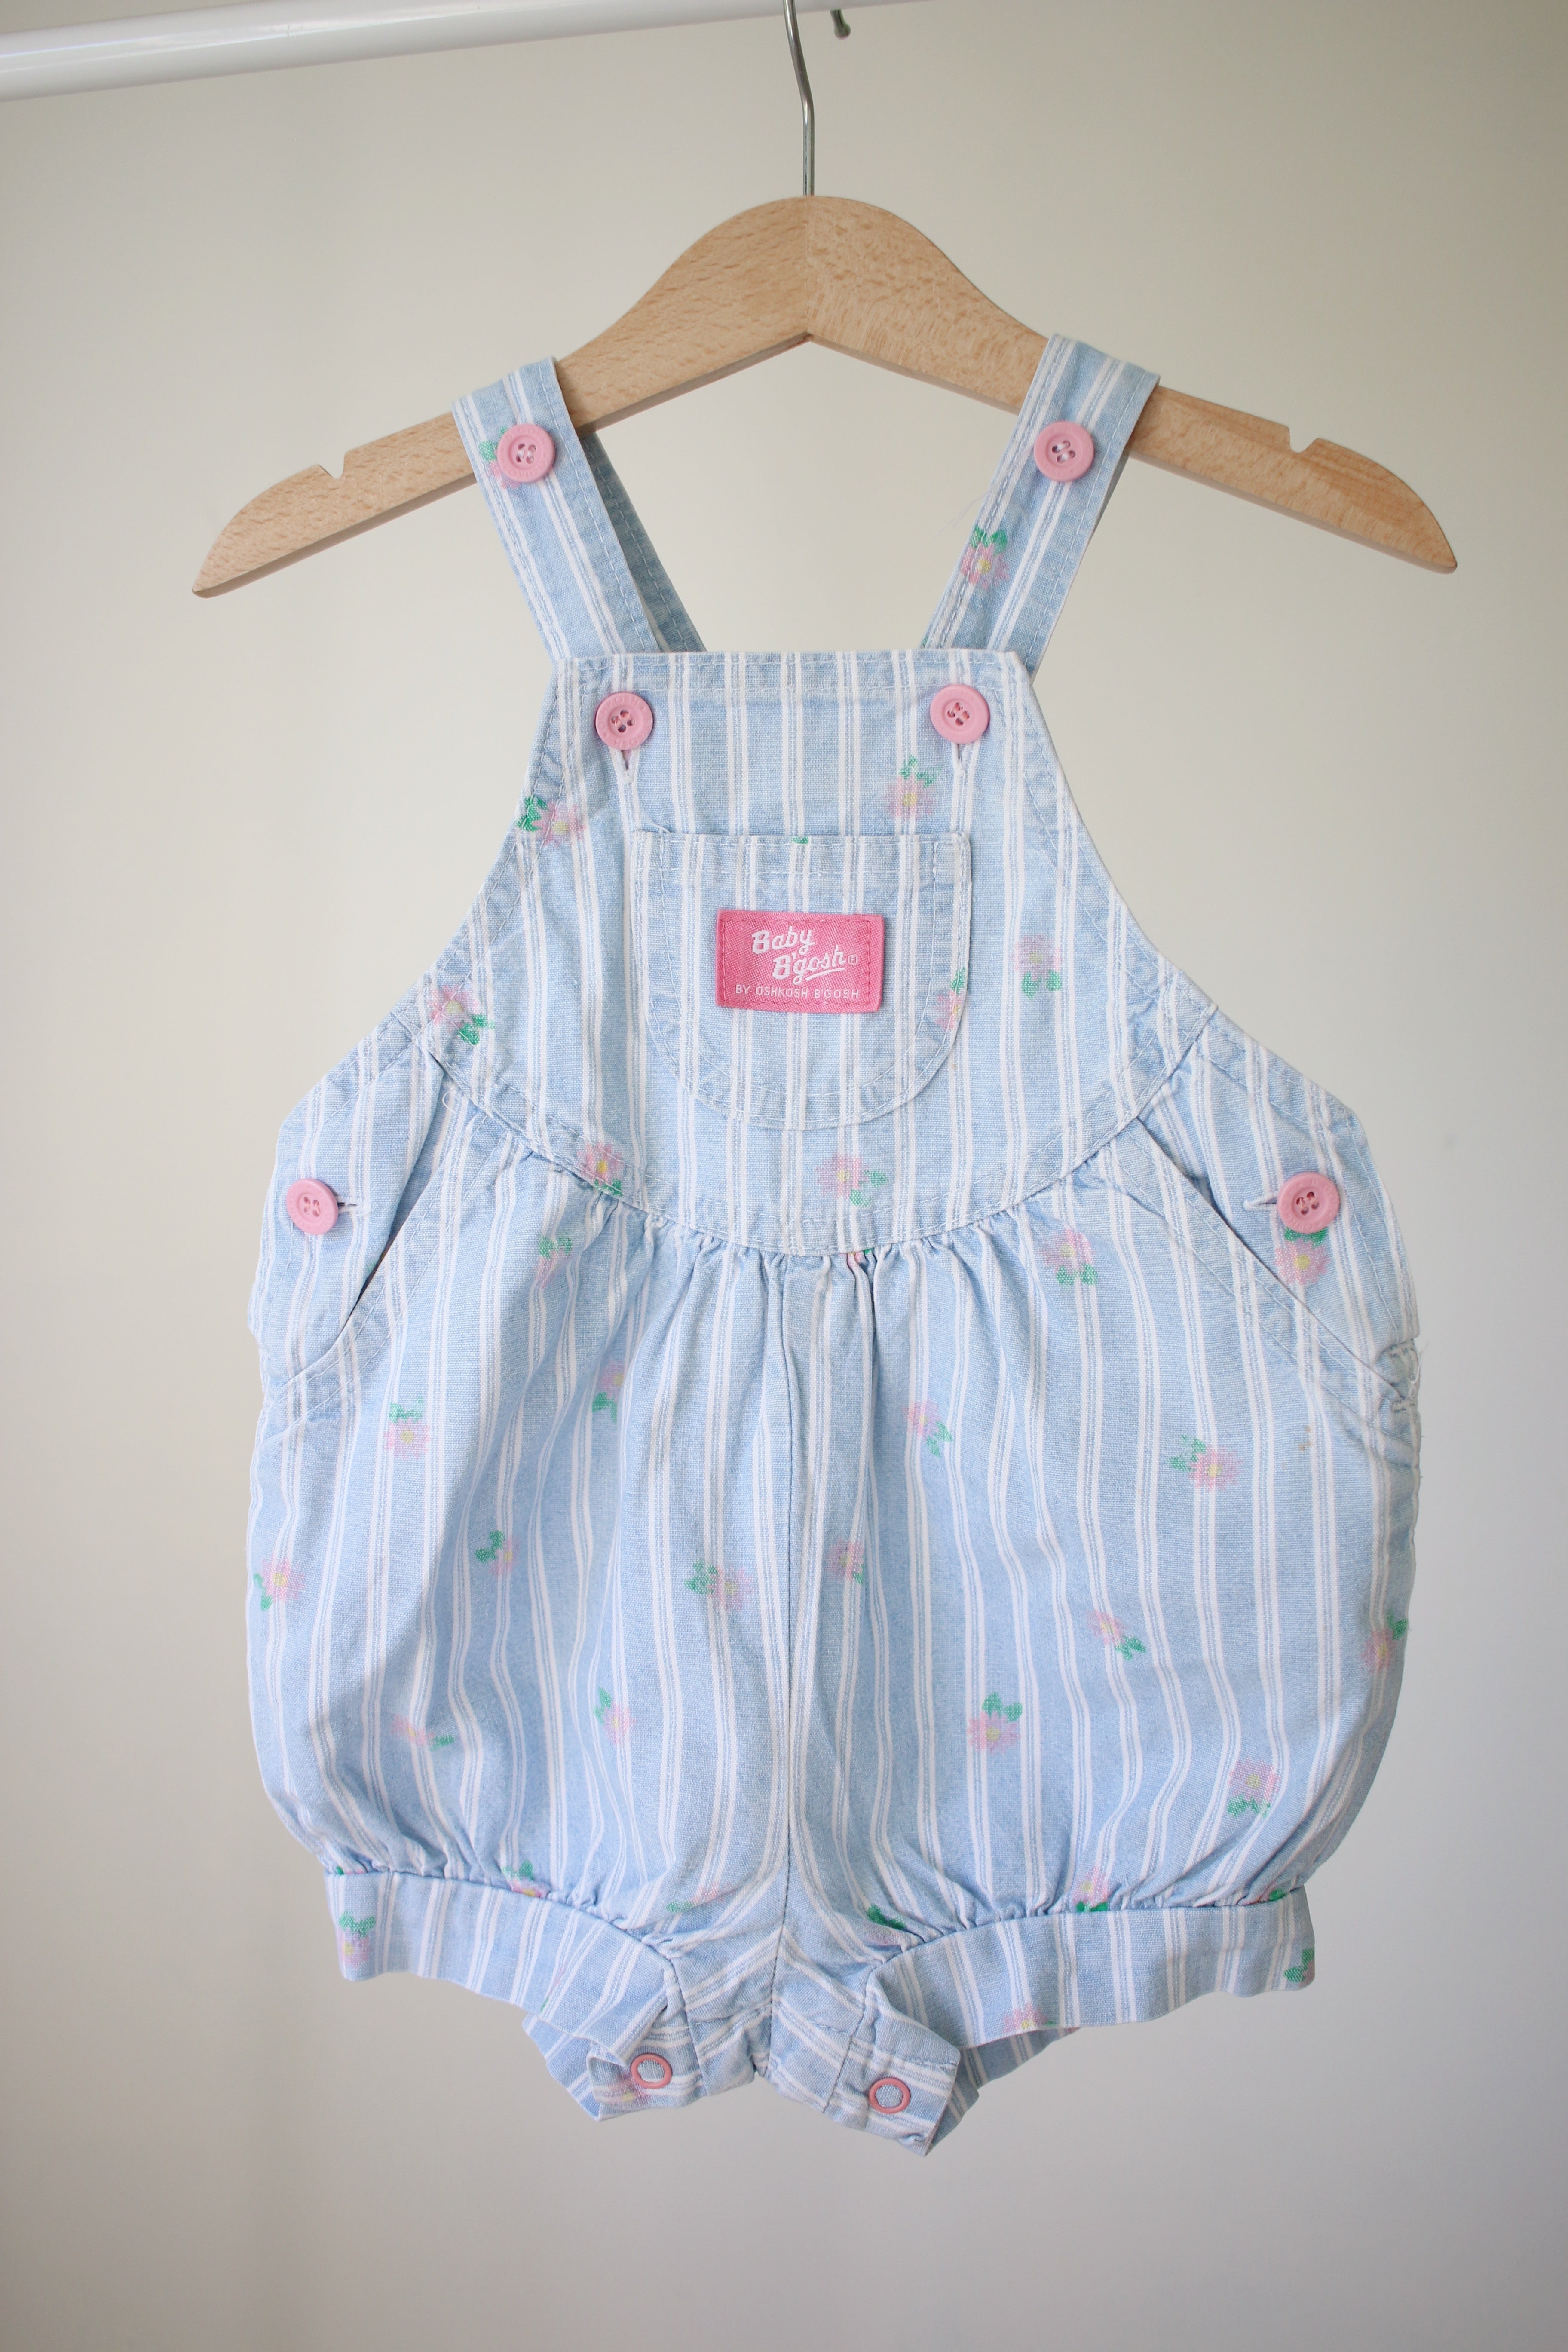 Vintage OshKosh blue striped floral bubble overalls - size 18 months - made in USA